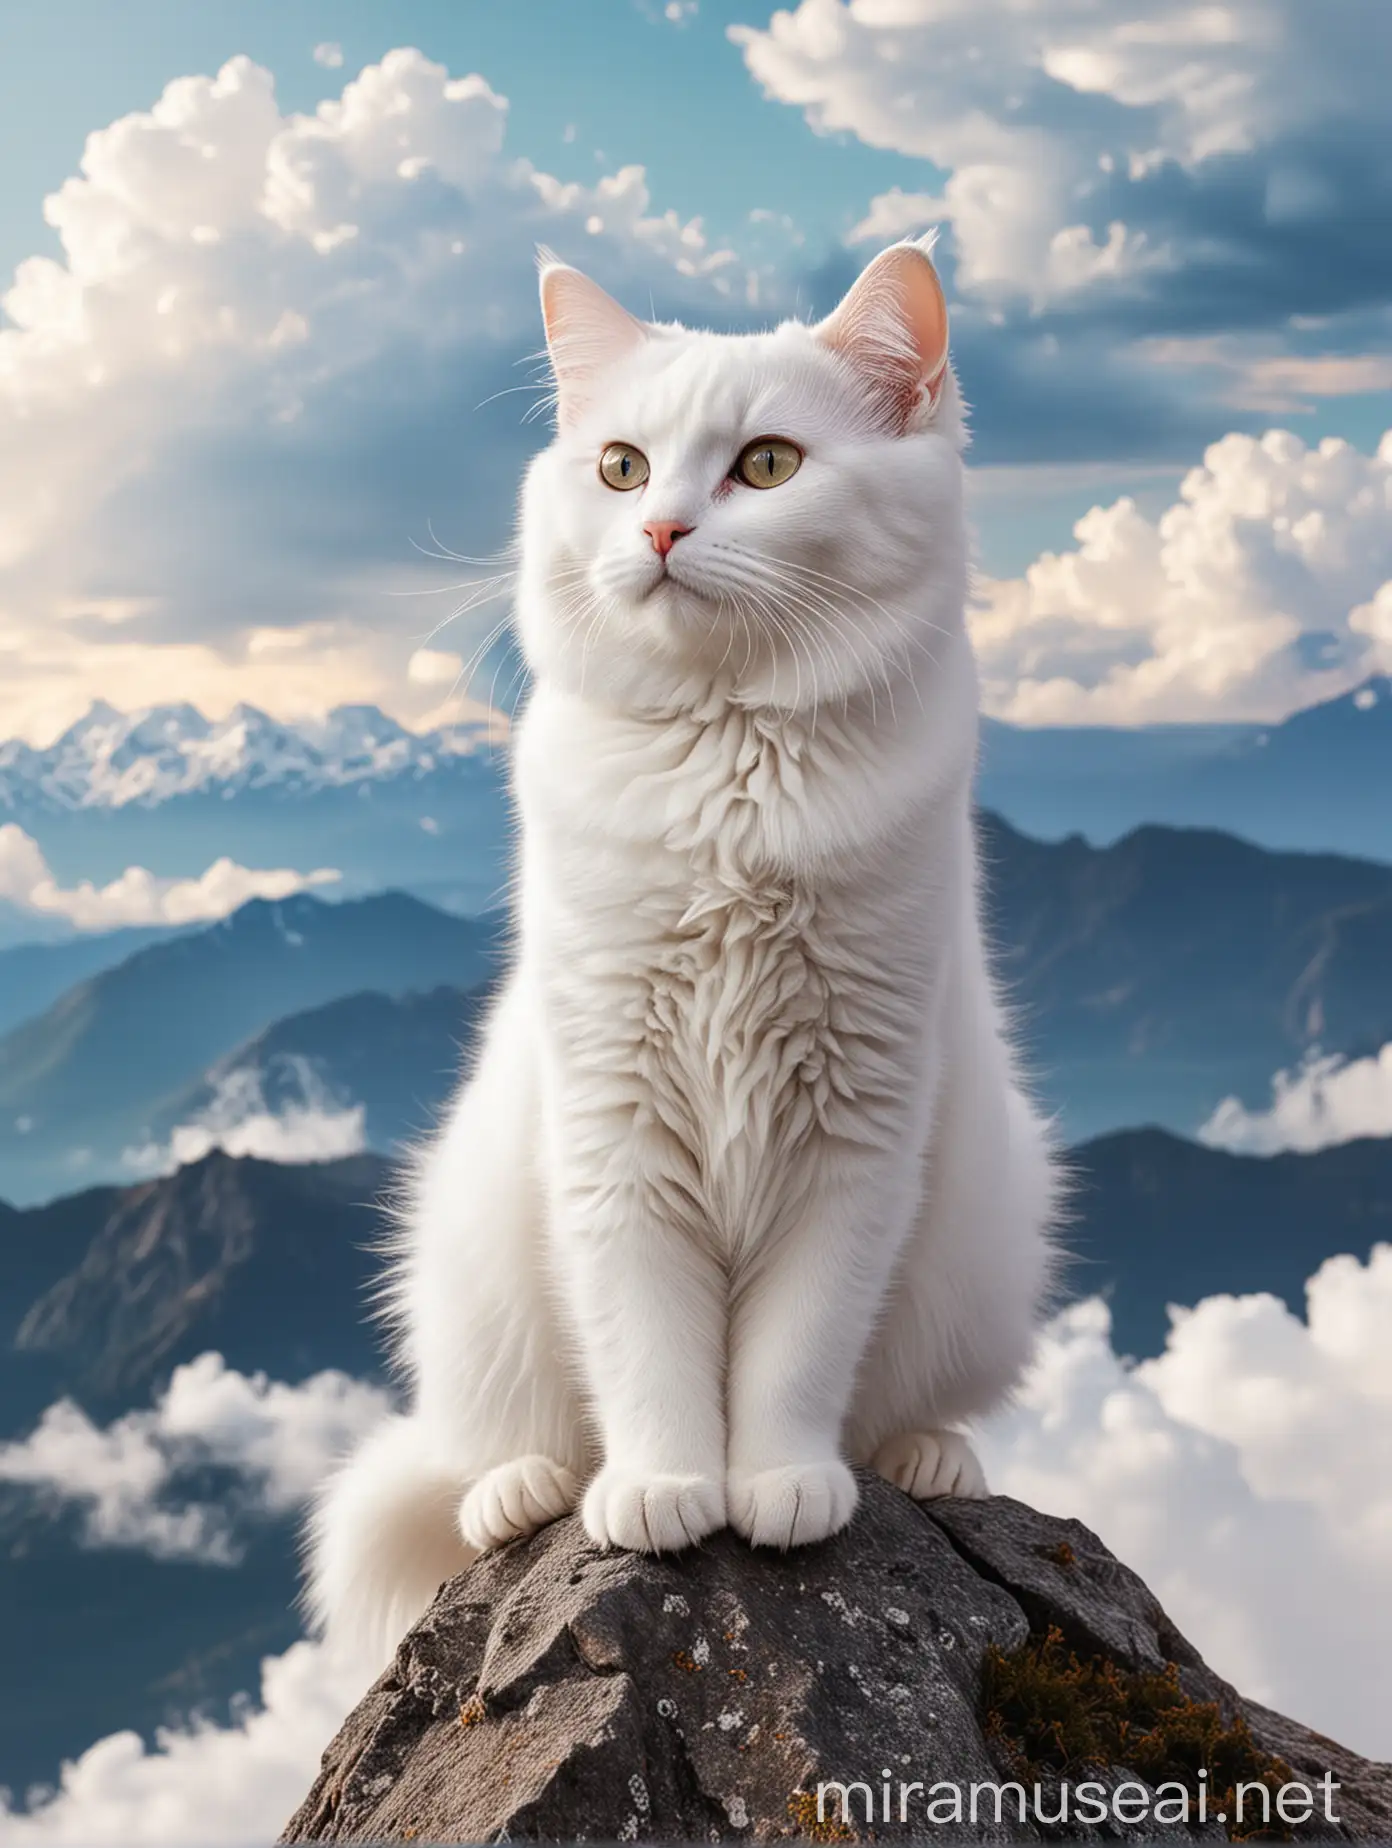 Adorable White Cat Gazing at Majestic Mountain Range from Fluffy Clouds